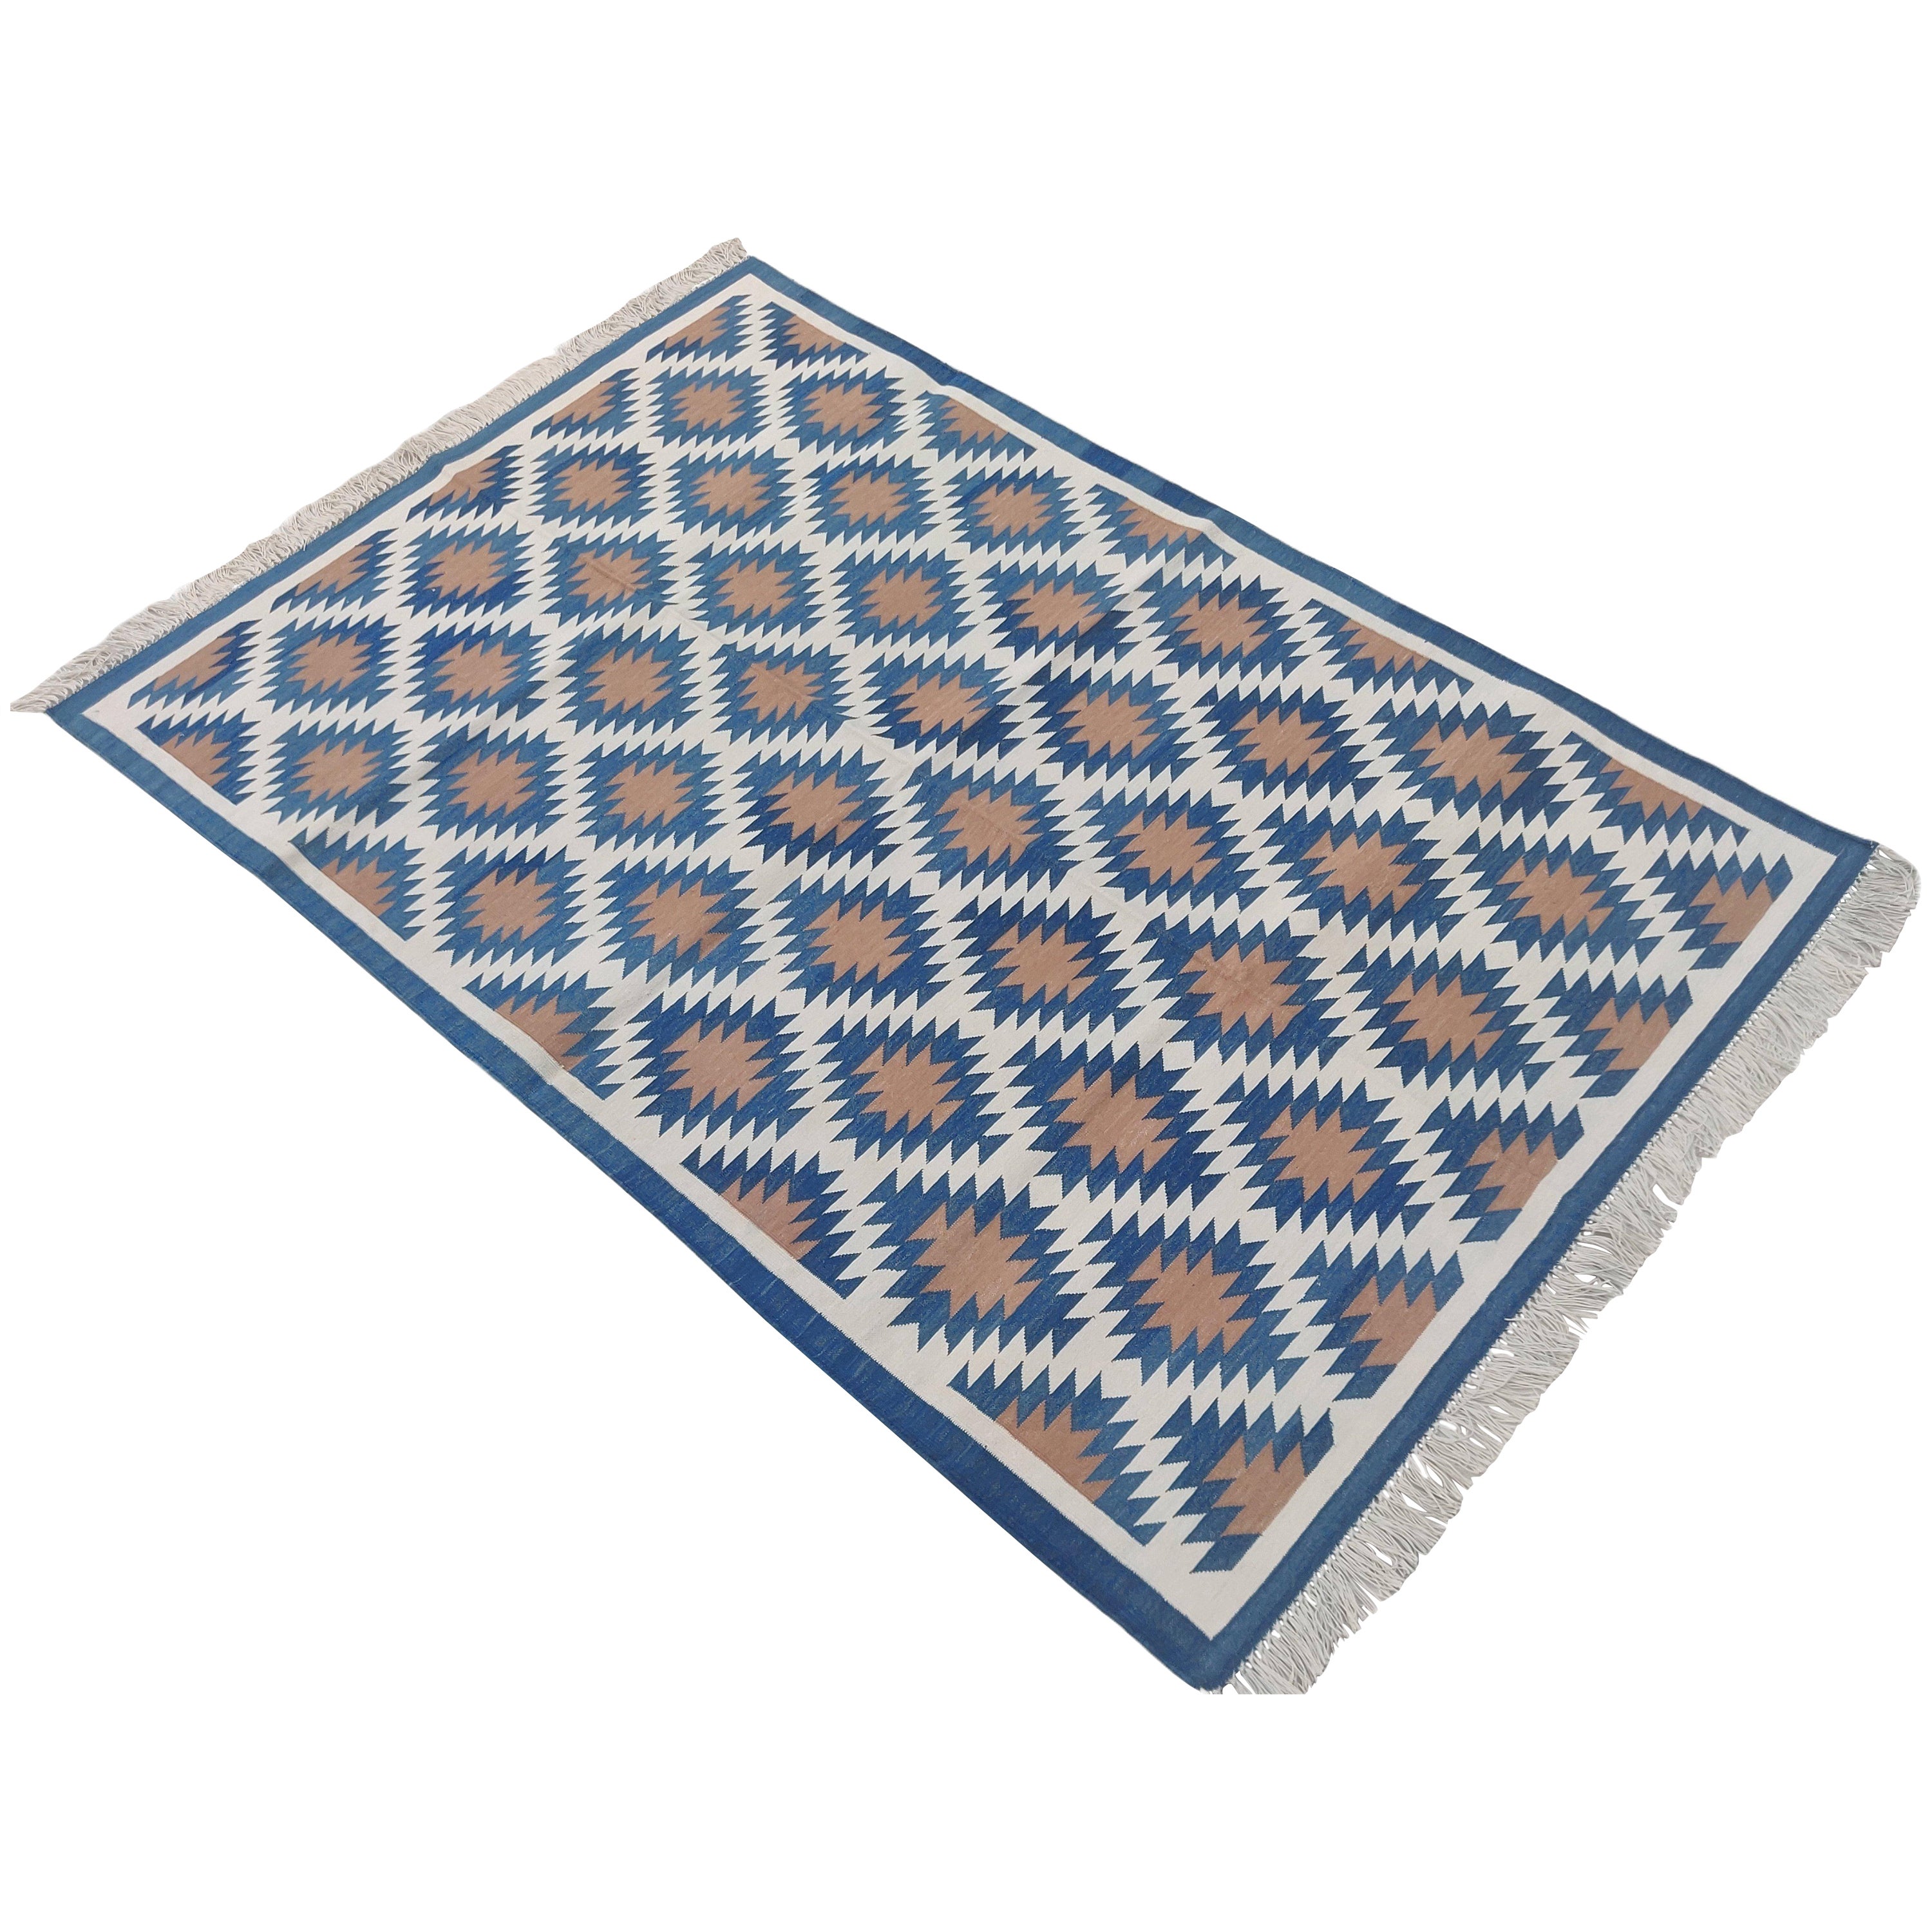 Handmade Cotton Area Flat Weave Rug, 4x6 Blue And White Geometric Indian Dhurrie For Sale